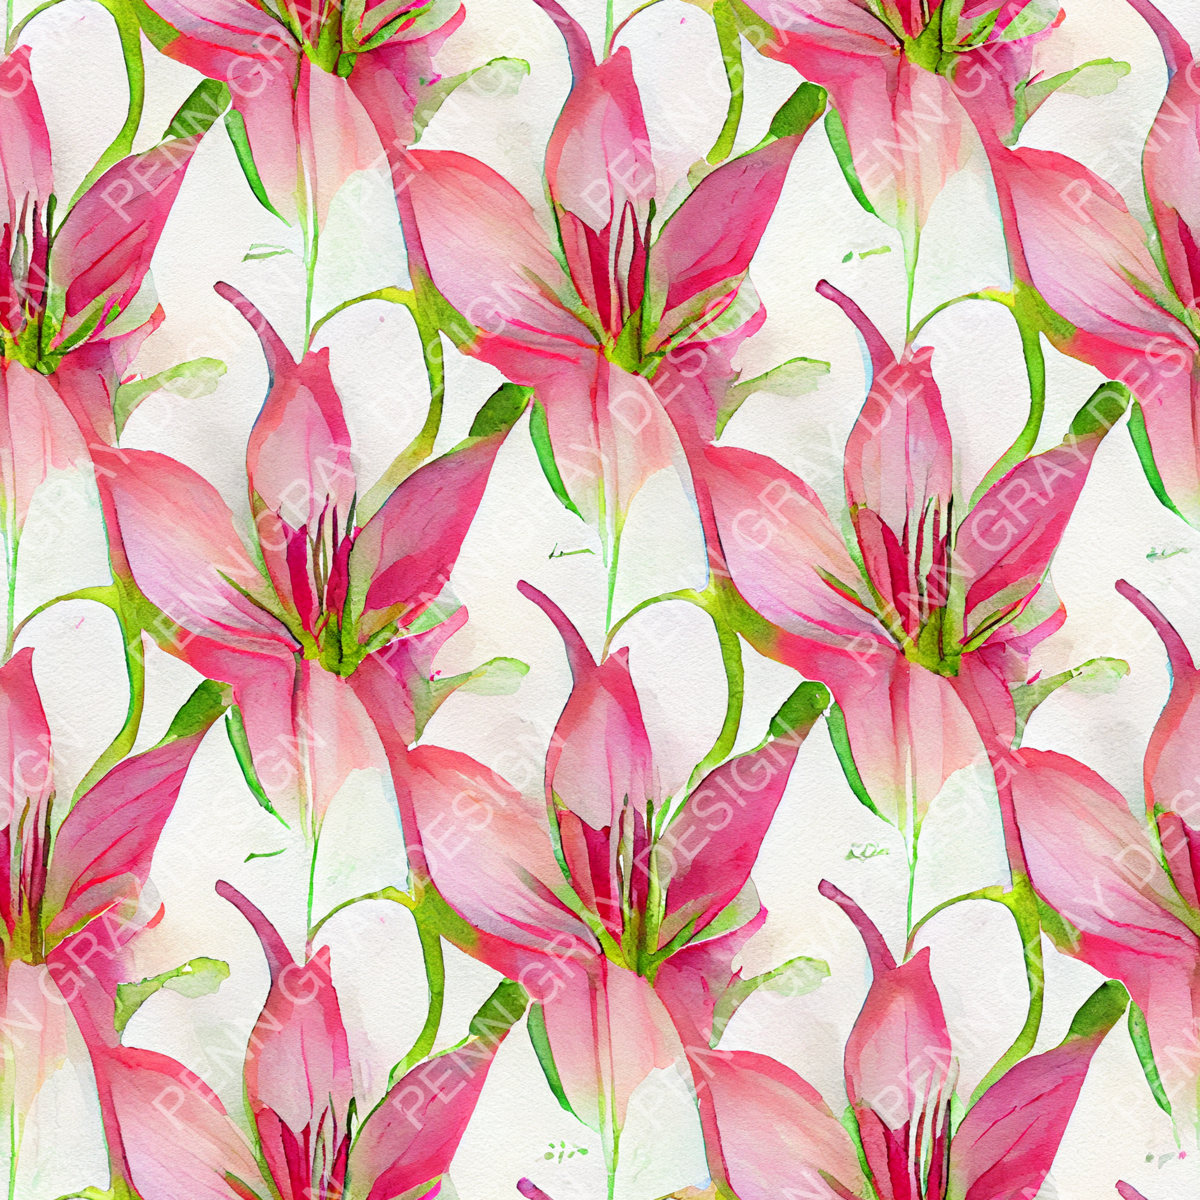 lilies-01-(watermarked)